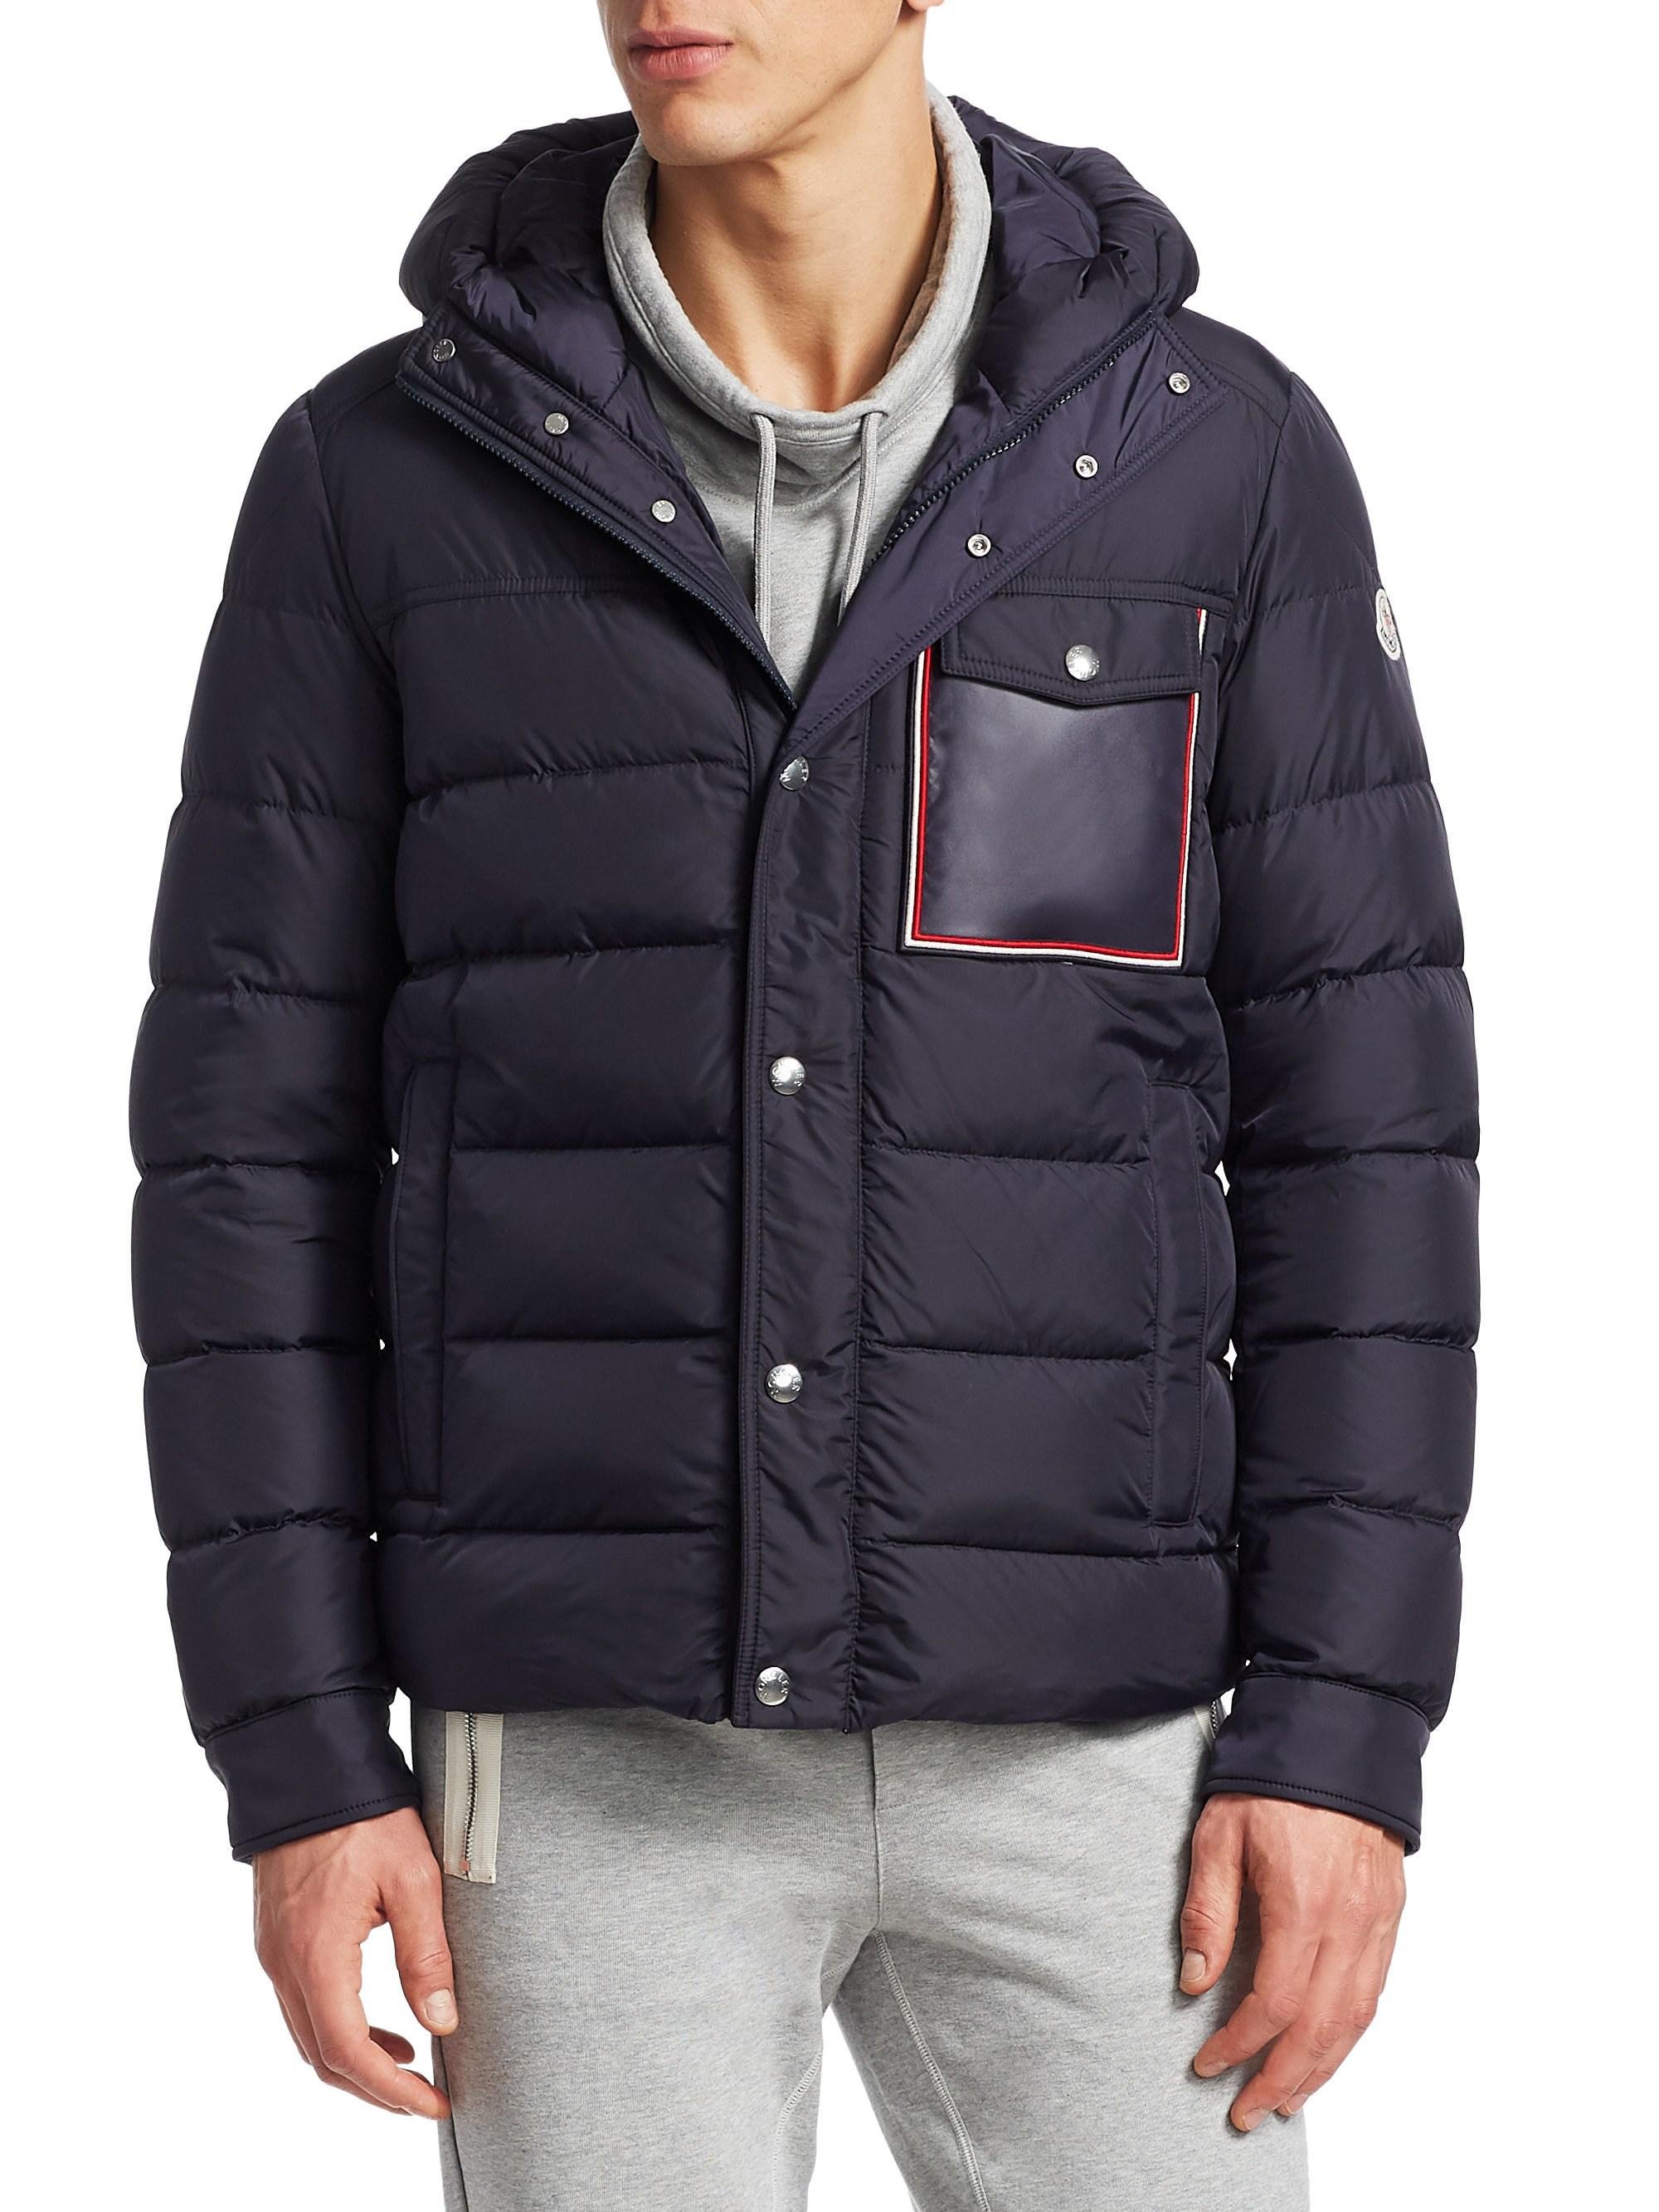 Moncler Synthetic Prevot Quilted Jacket in Navy (Blue) for Men - Lyst